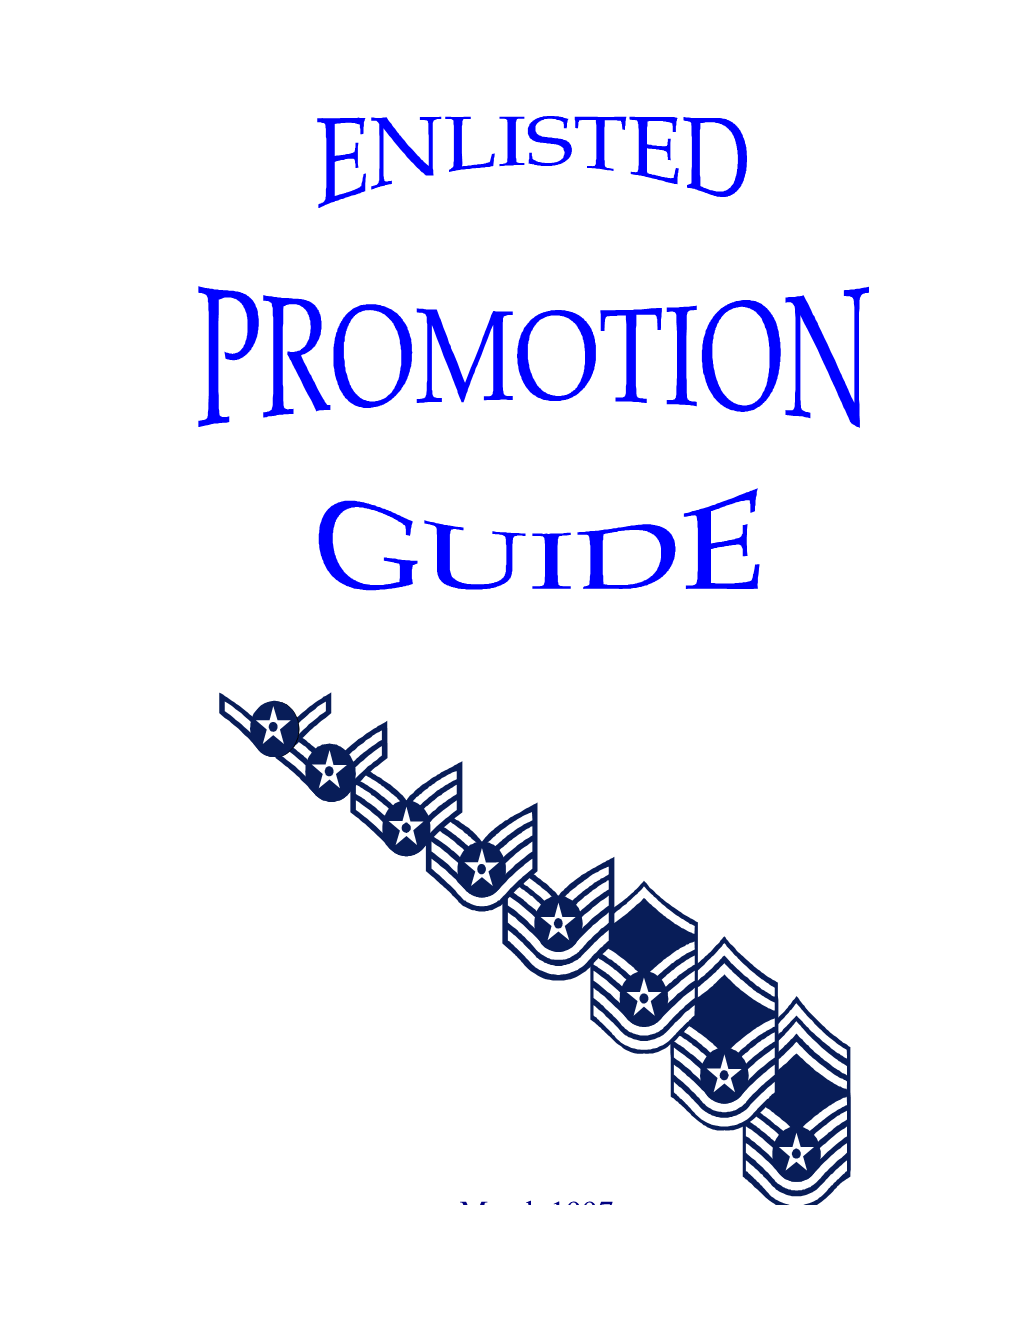 PURPOSE: the Purpose of This Guide Is to Explain in Simple Terms How the Enlisted Promotion